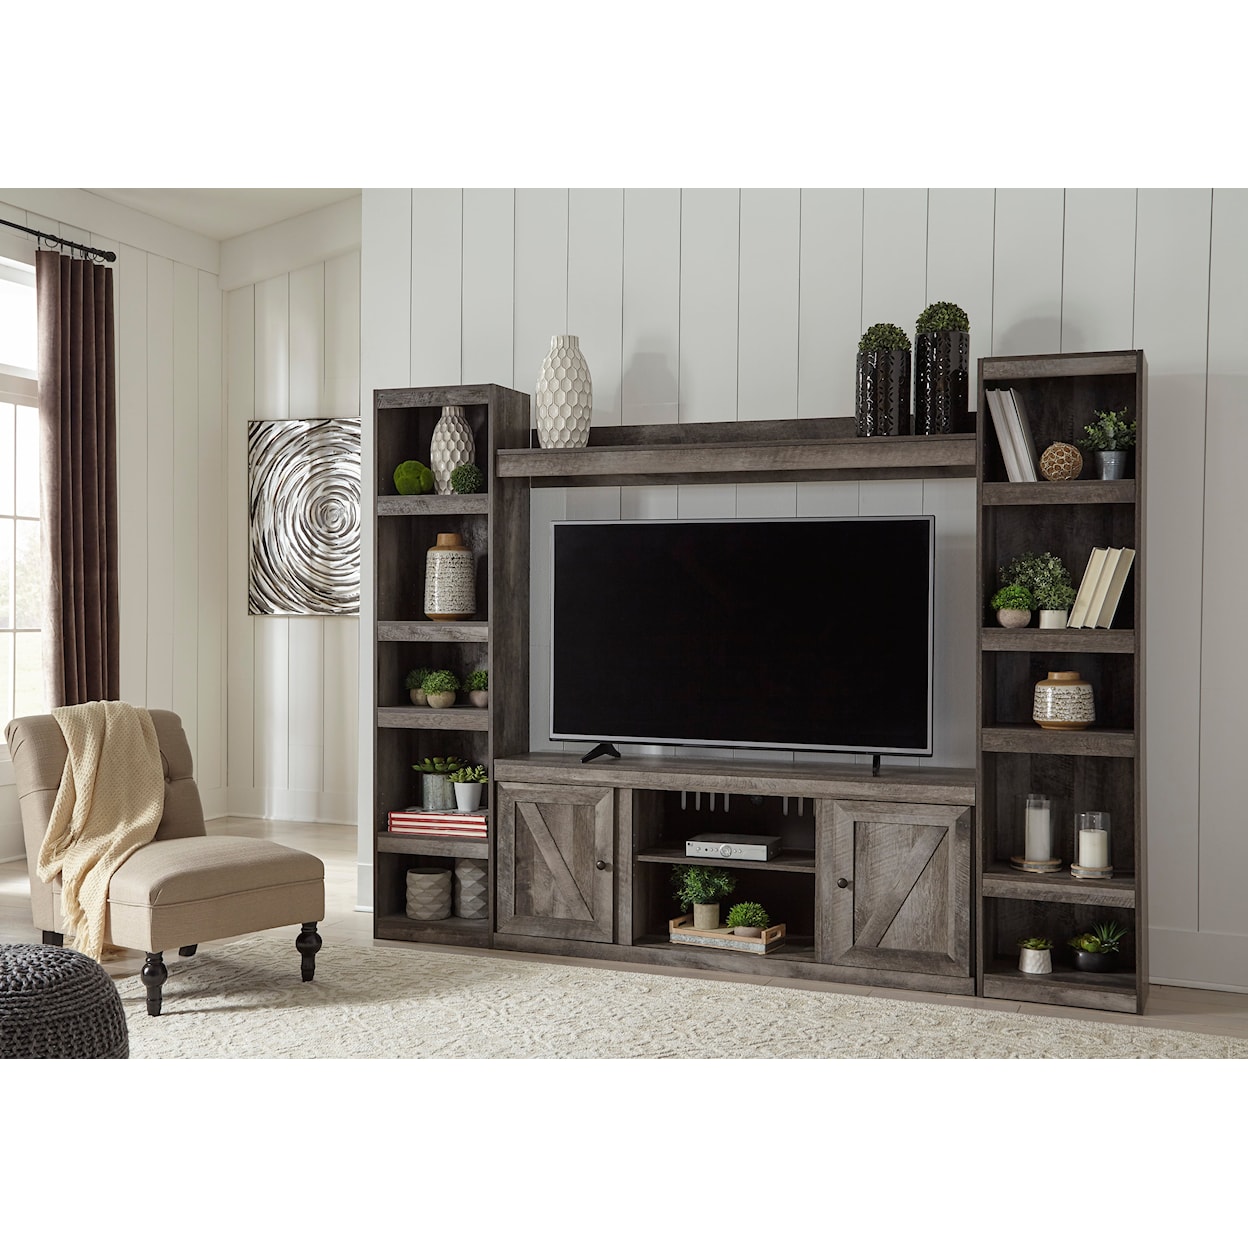 Signature Design by Ashley Wynnlow Entertainment Center with Piers & Bridge